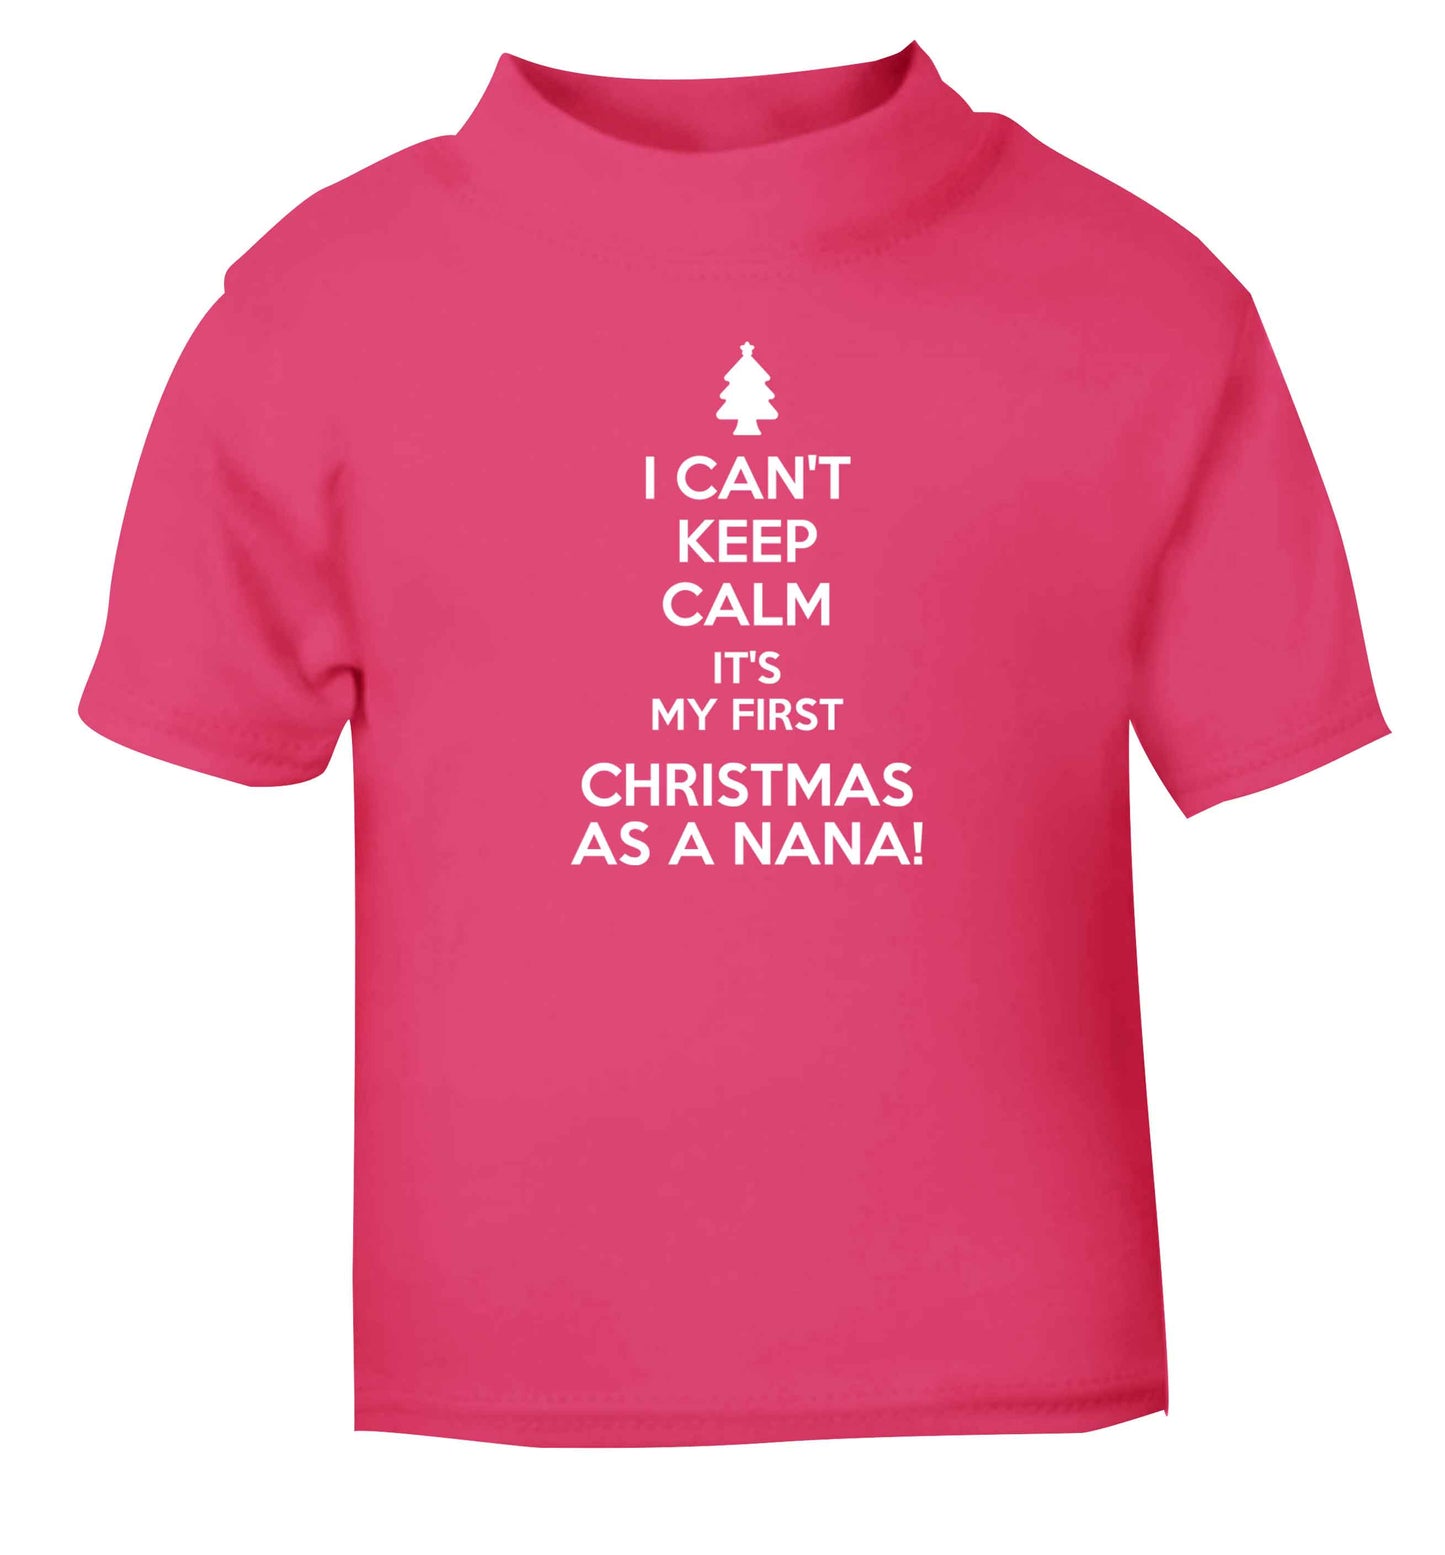 I can't keep calm it's my first Christmas as a nana! pink Baby Toddler Tshirt 2 Years